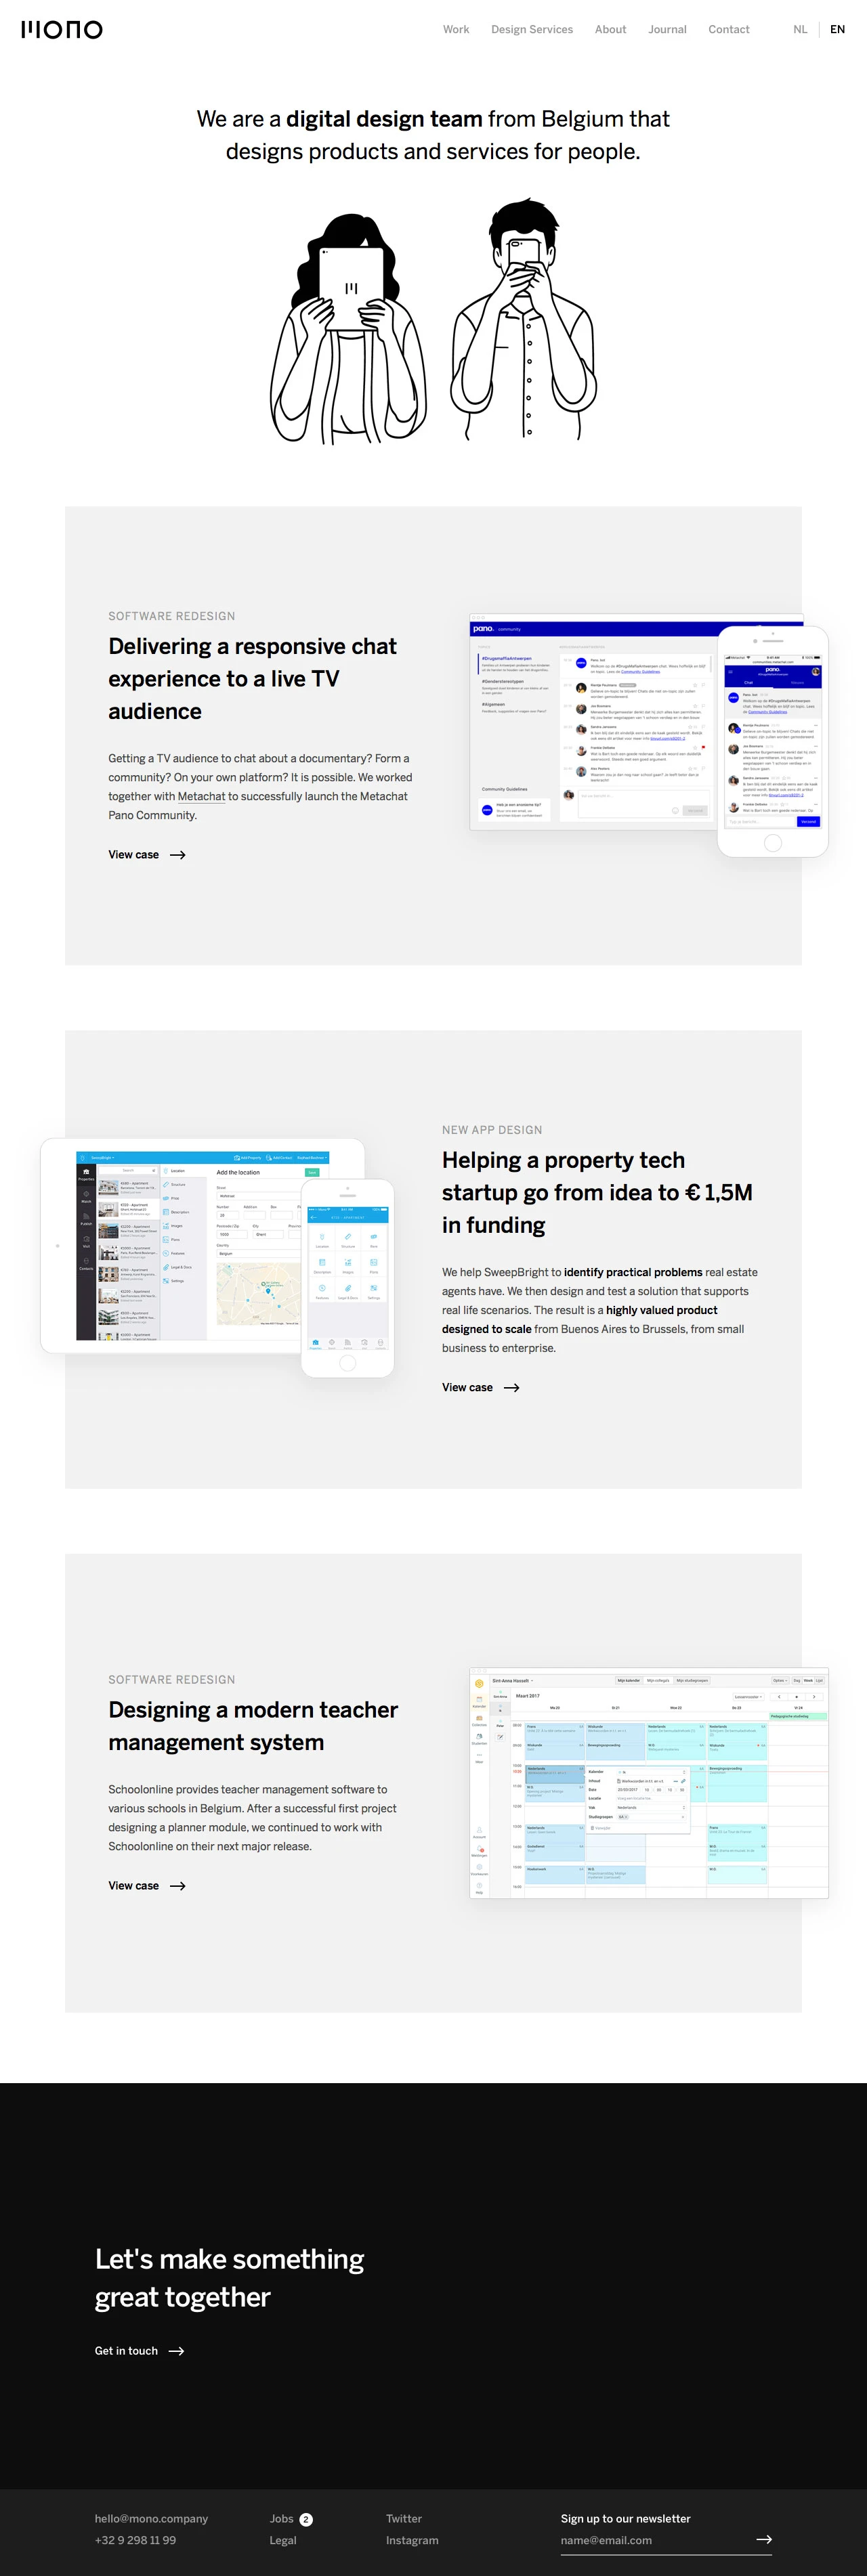 Mono Landing Page Example: We are a digital design team from Belgium that designs products and services for people.